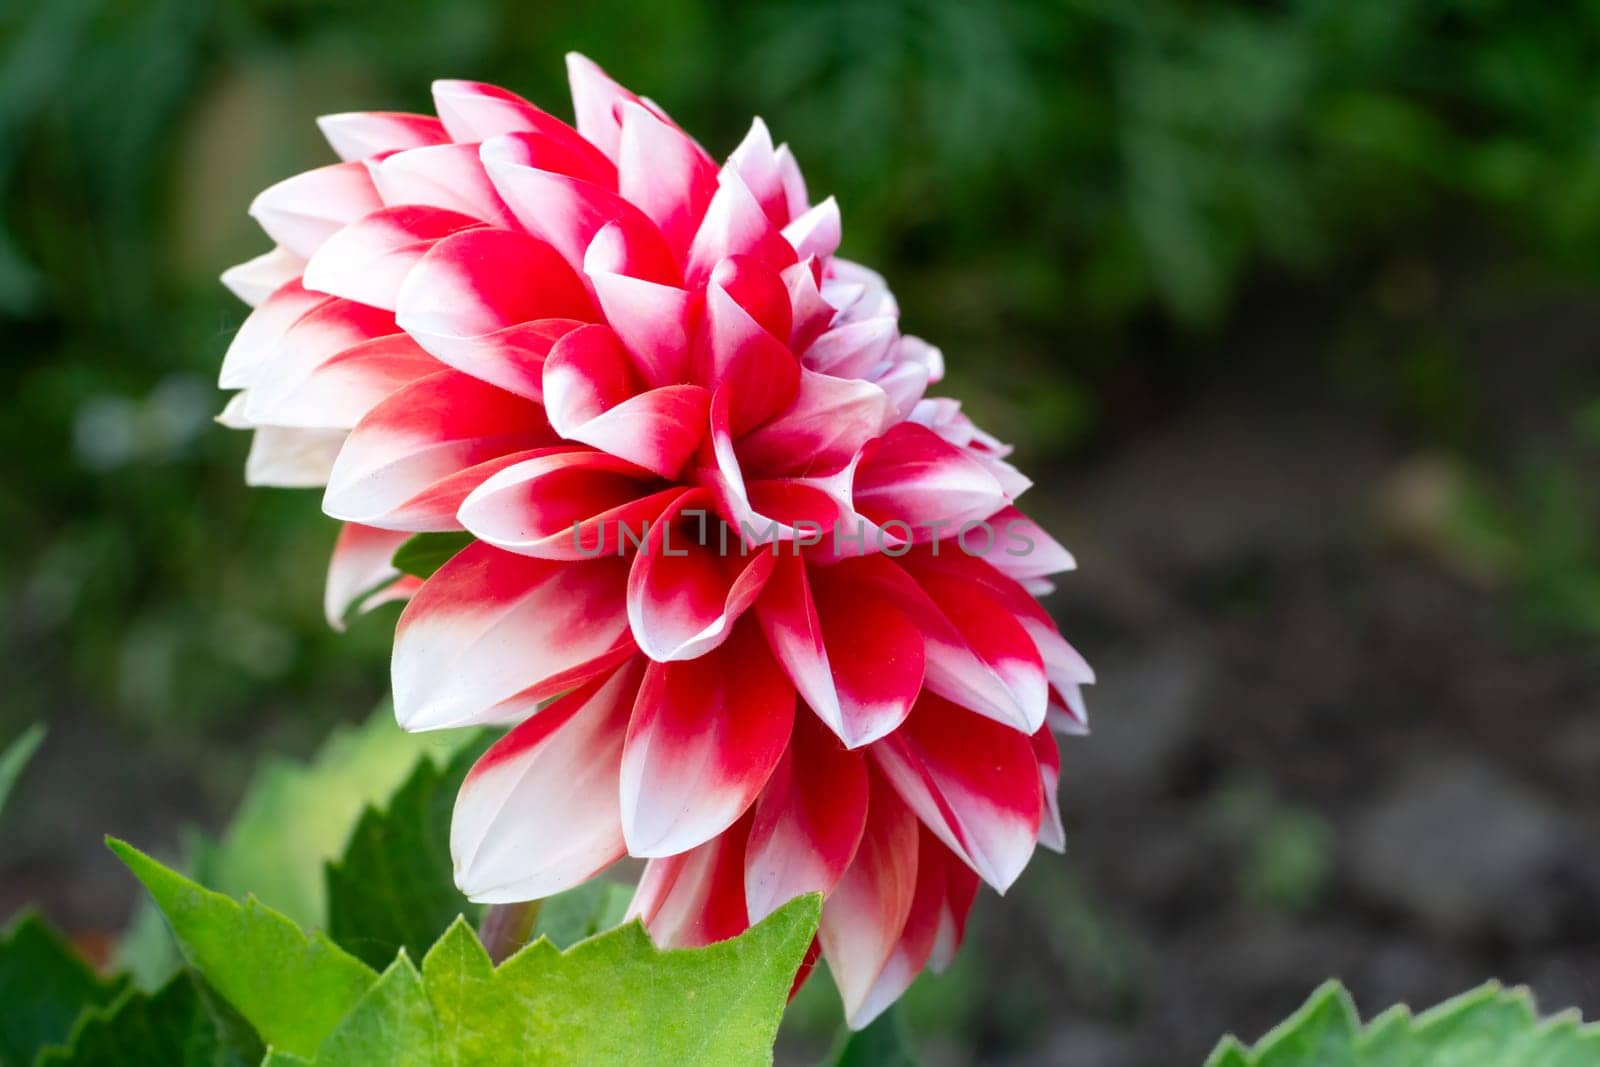 Bud of dahlia with blurred green background. by mvg6894